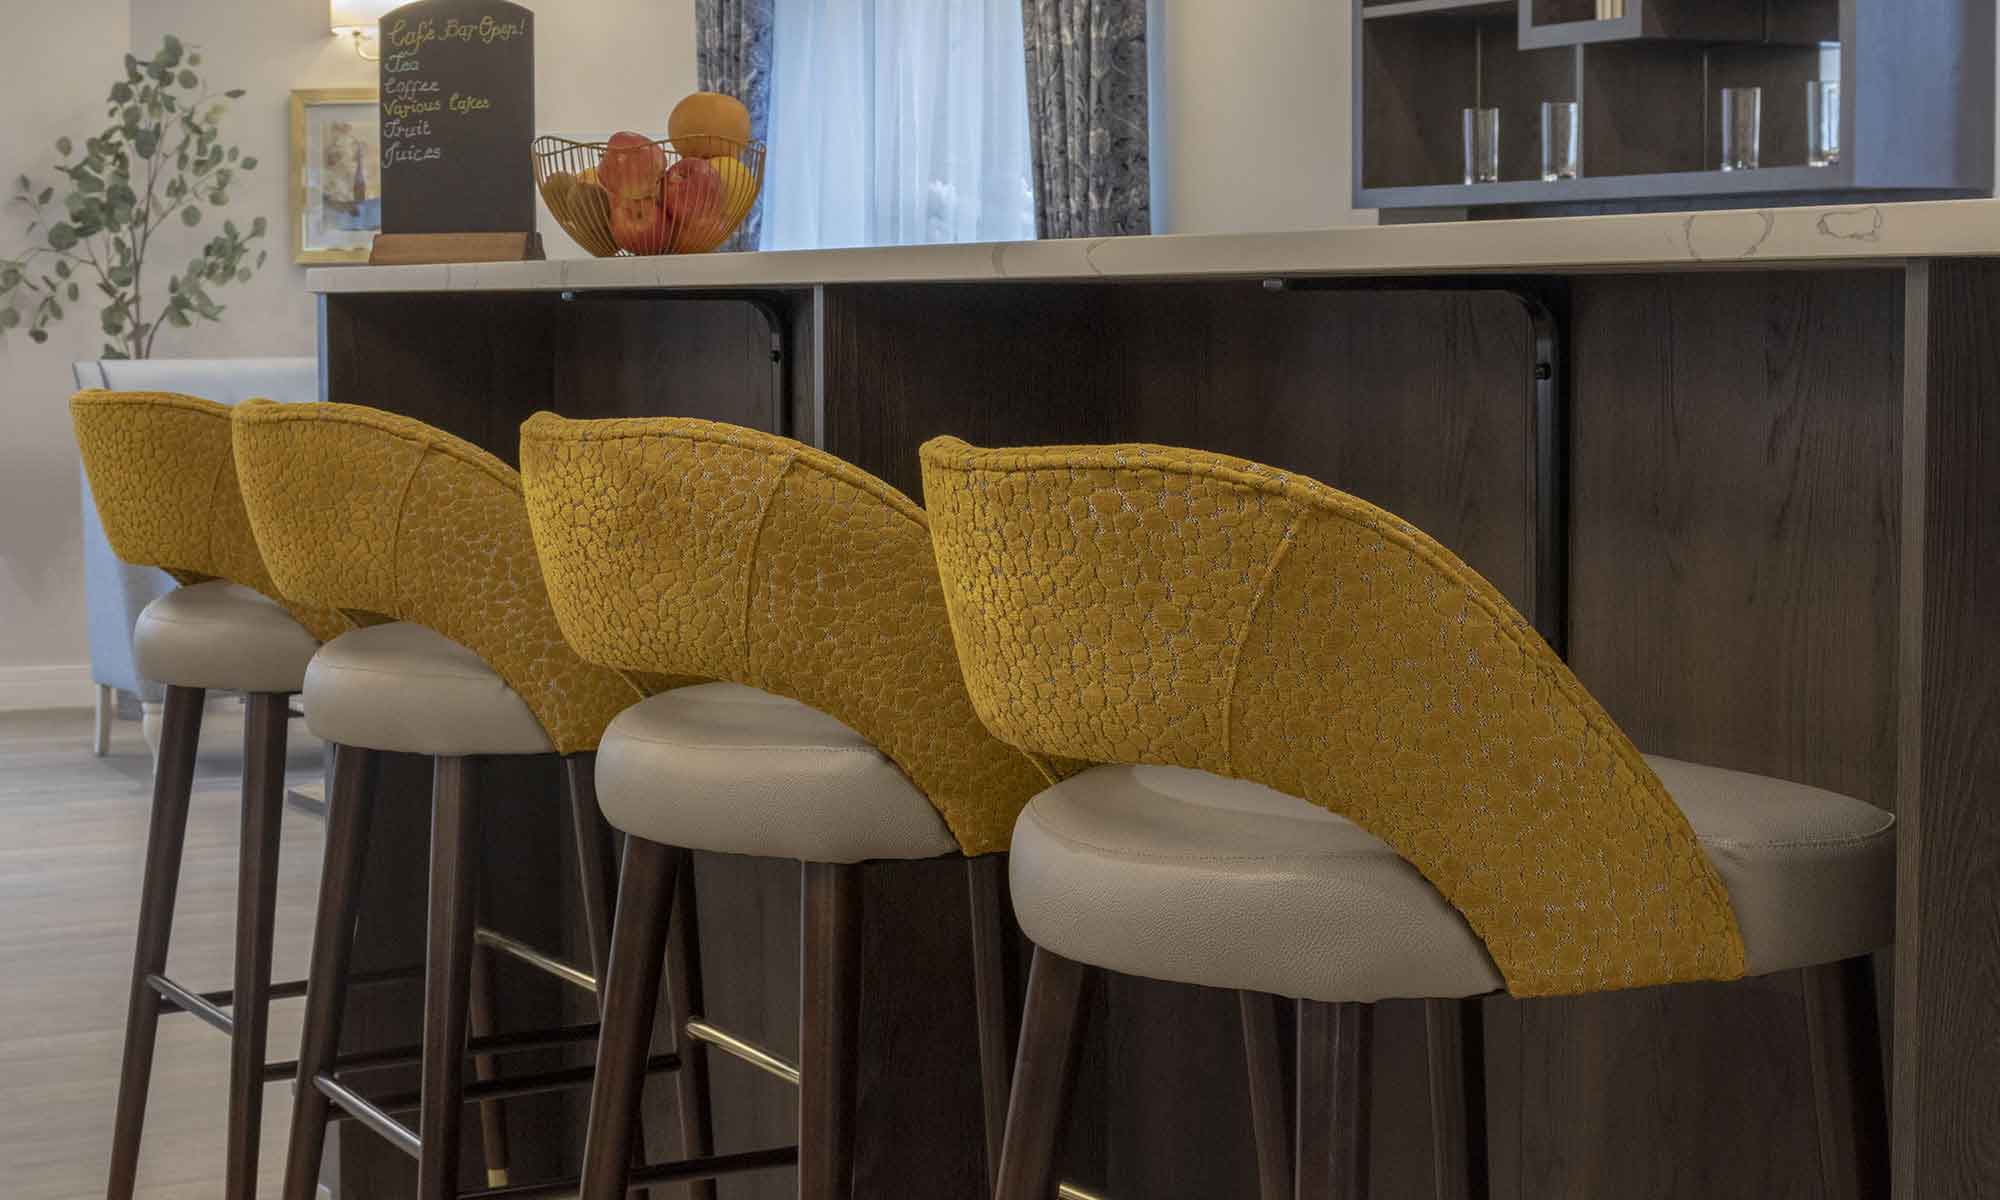 Four Paulo bar stools in a mustard fabric against a walnut bar with marble top